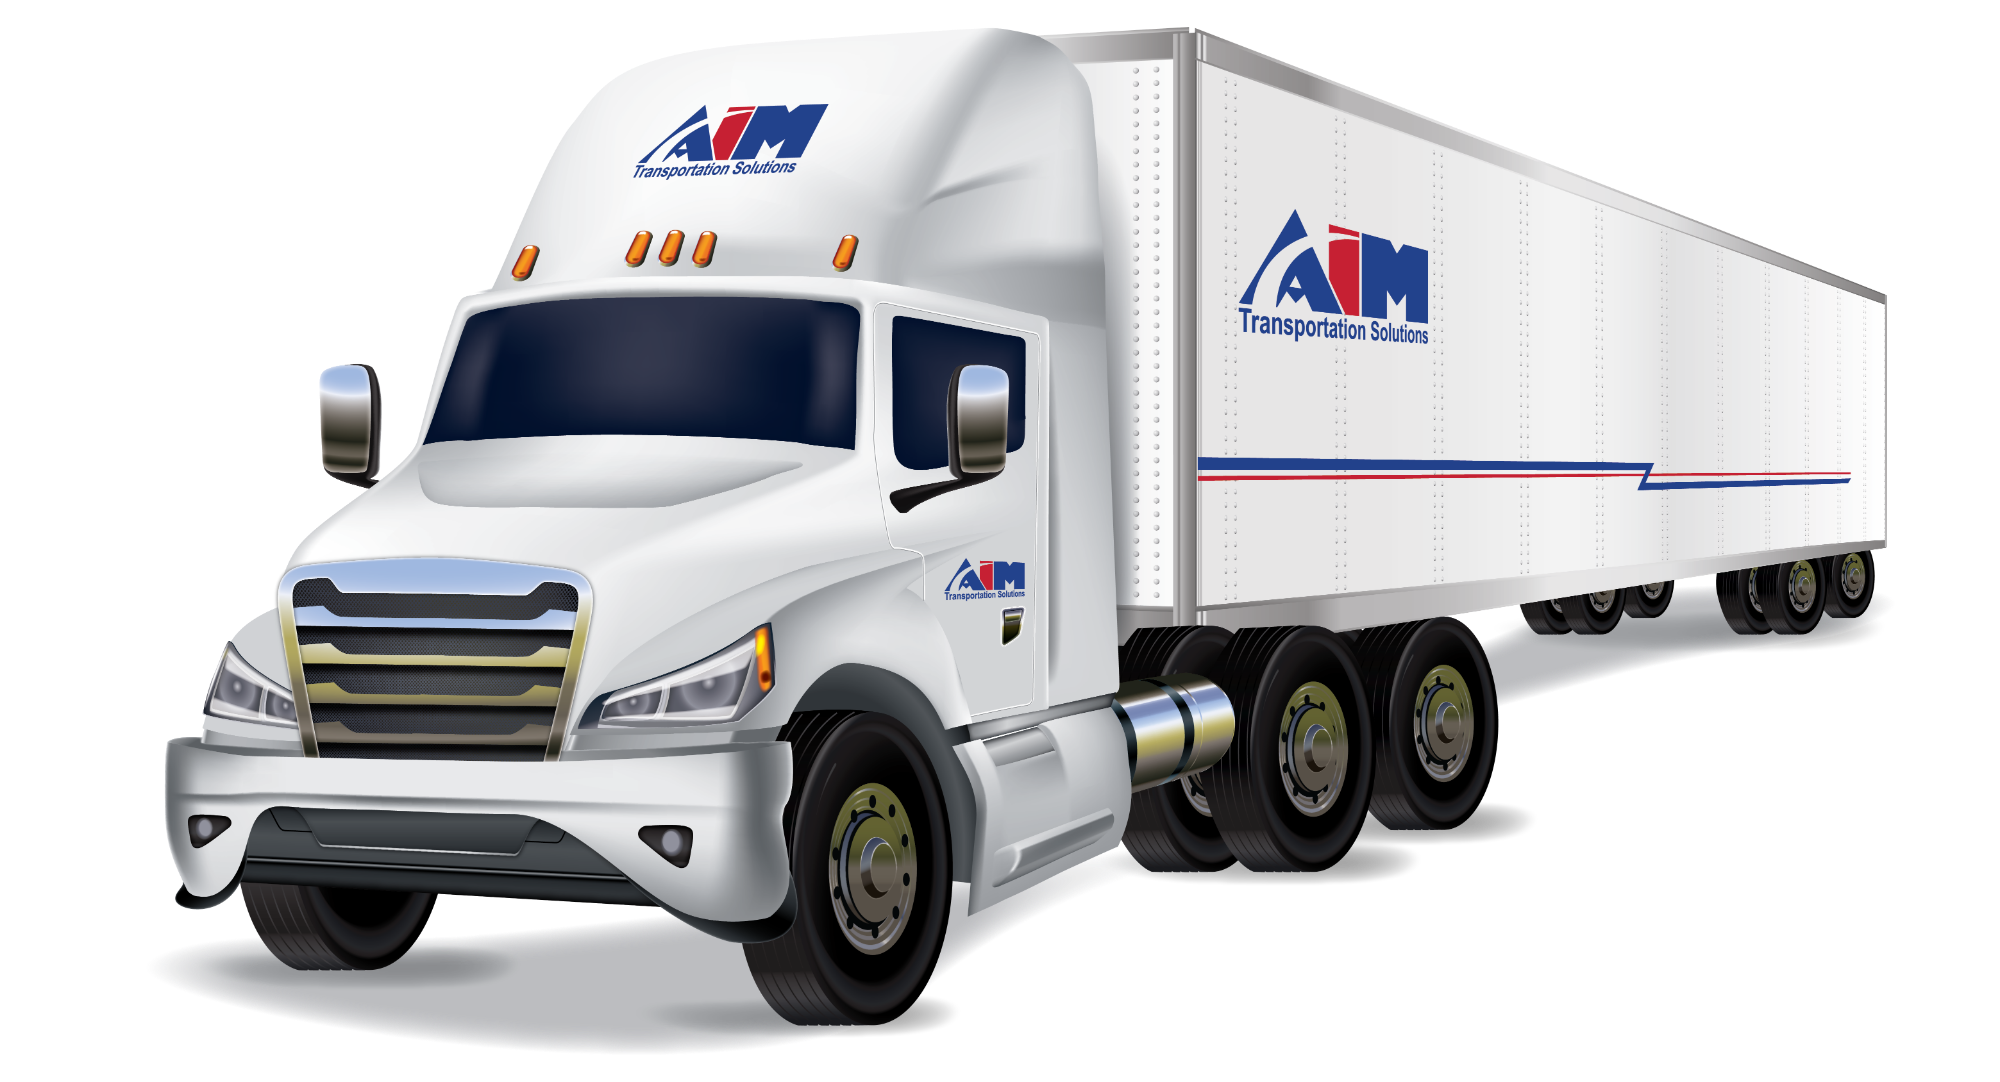 Illustrated depicition of Aim cab truck